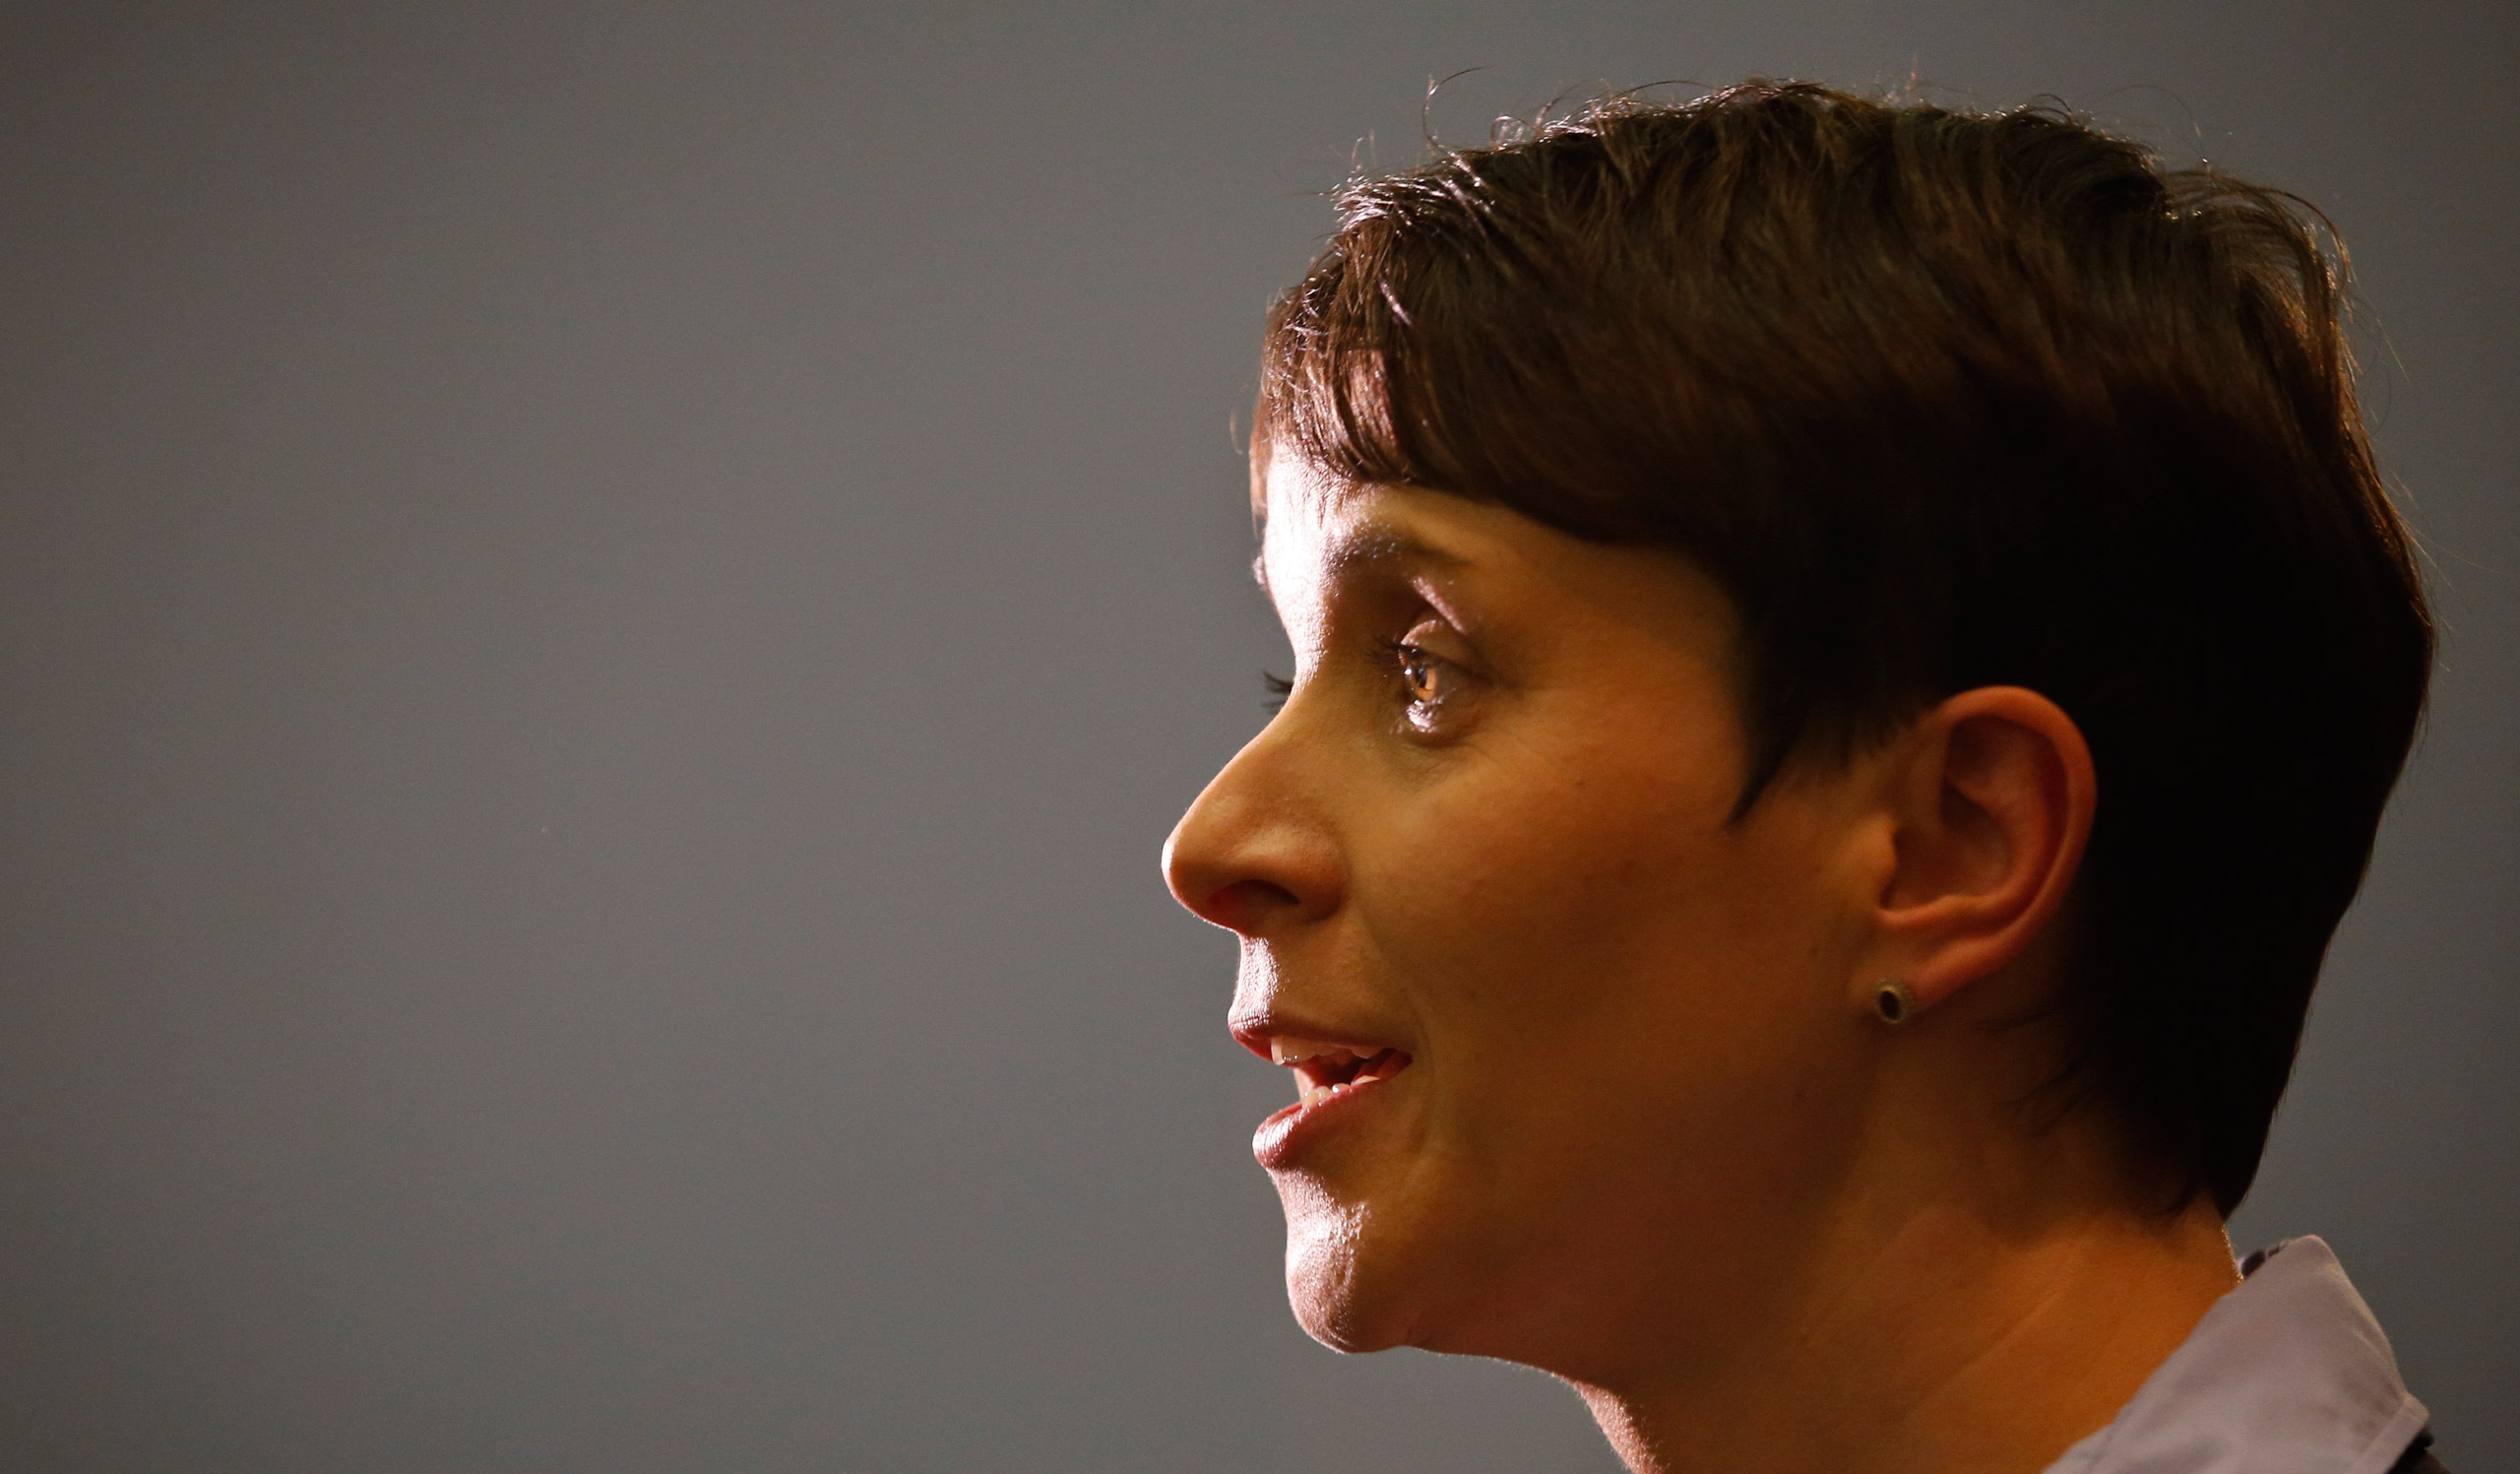 Frauke Petry, chairwoman of the anti-immigration party Alternative for Germany (AfD) talks to the media after first exit polls in three regional state elections in Berlin on March 13, 2016. (Fabrizio Bensch—Reuters)